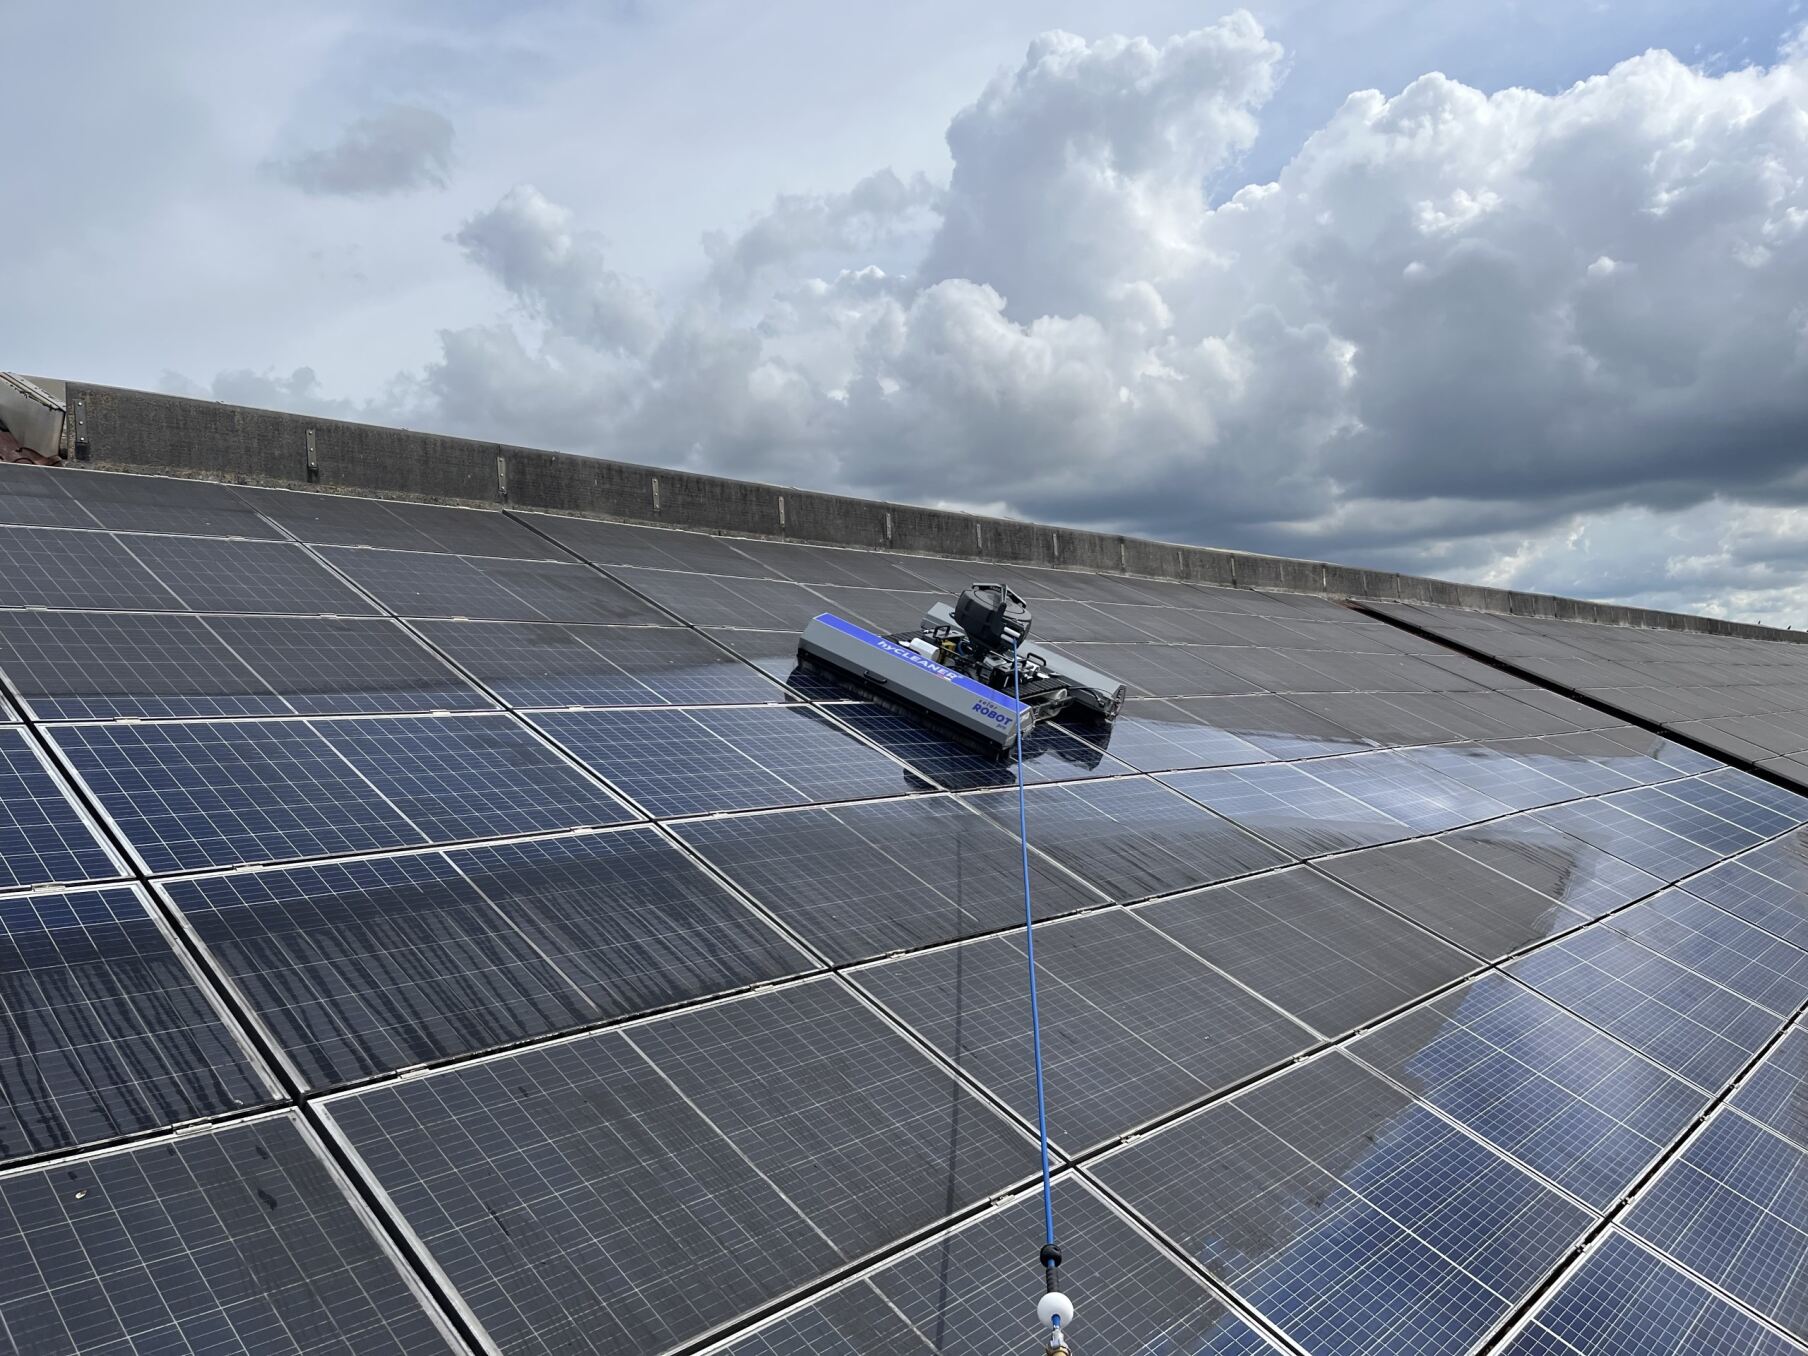 How often should solar panels be cleaned? A robot cleans a large solar surface, the differences between the cleaned and the dirty surface are clearly visible.